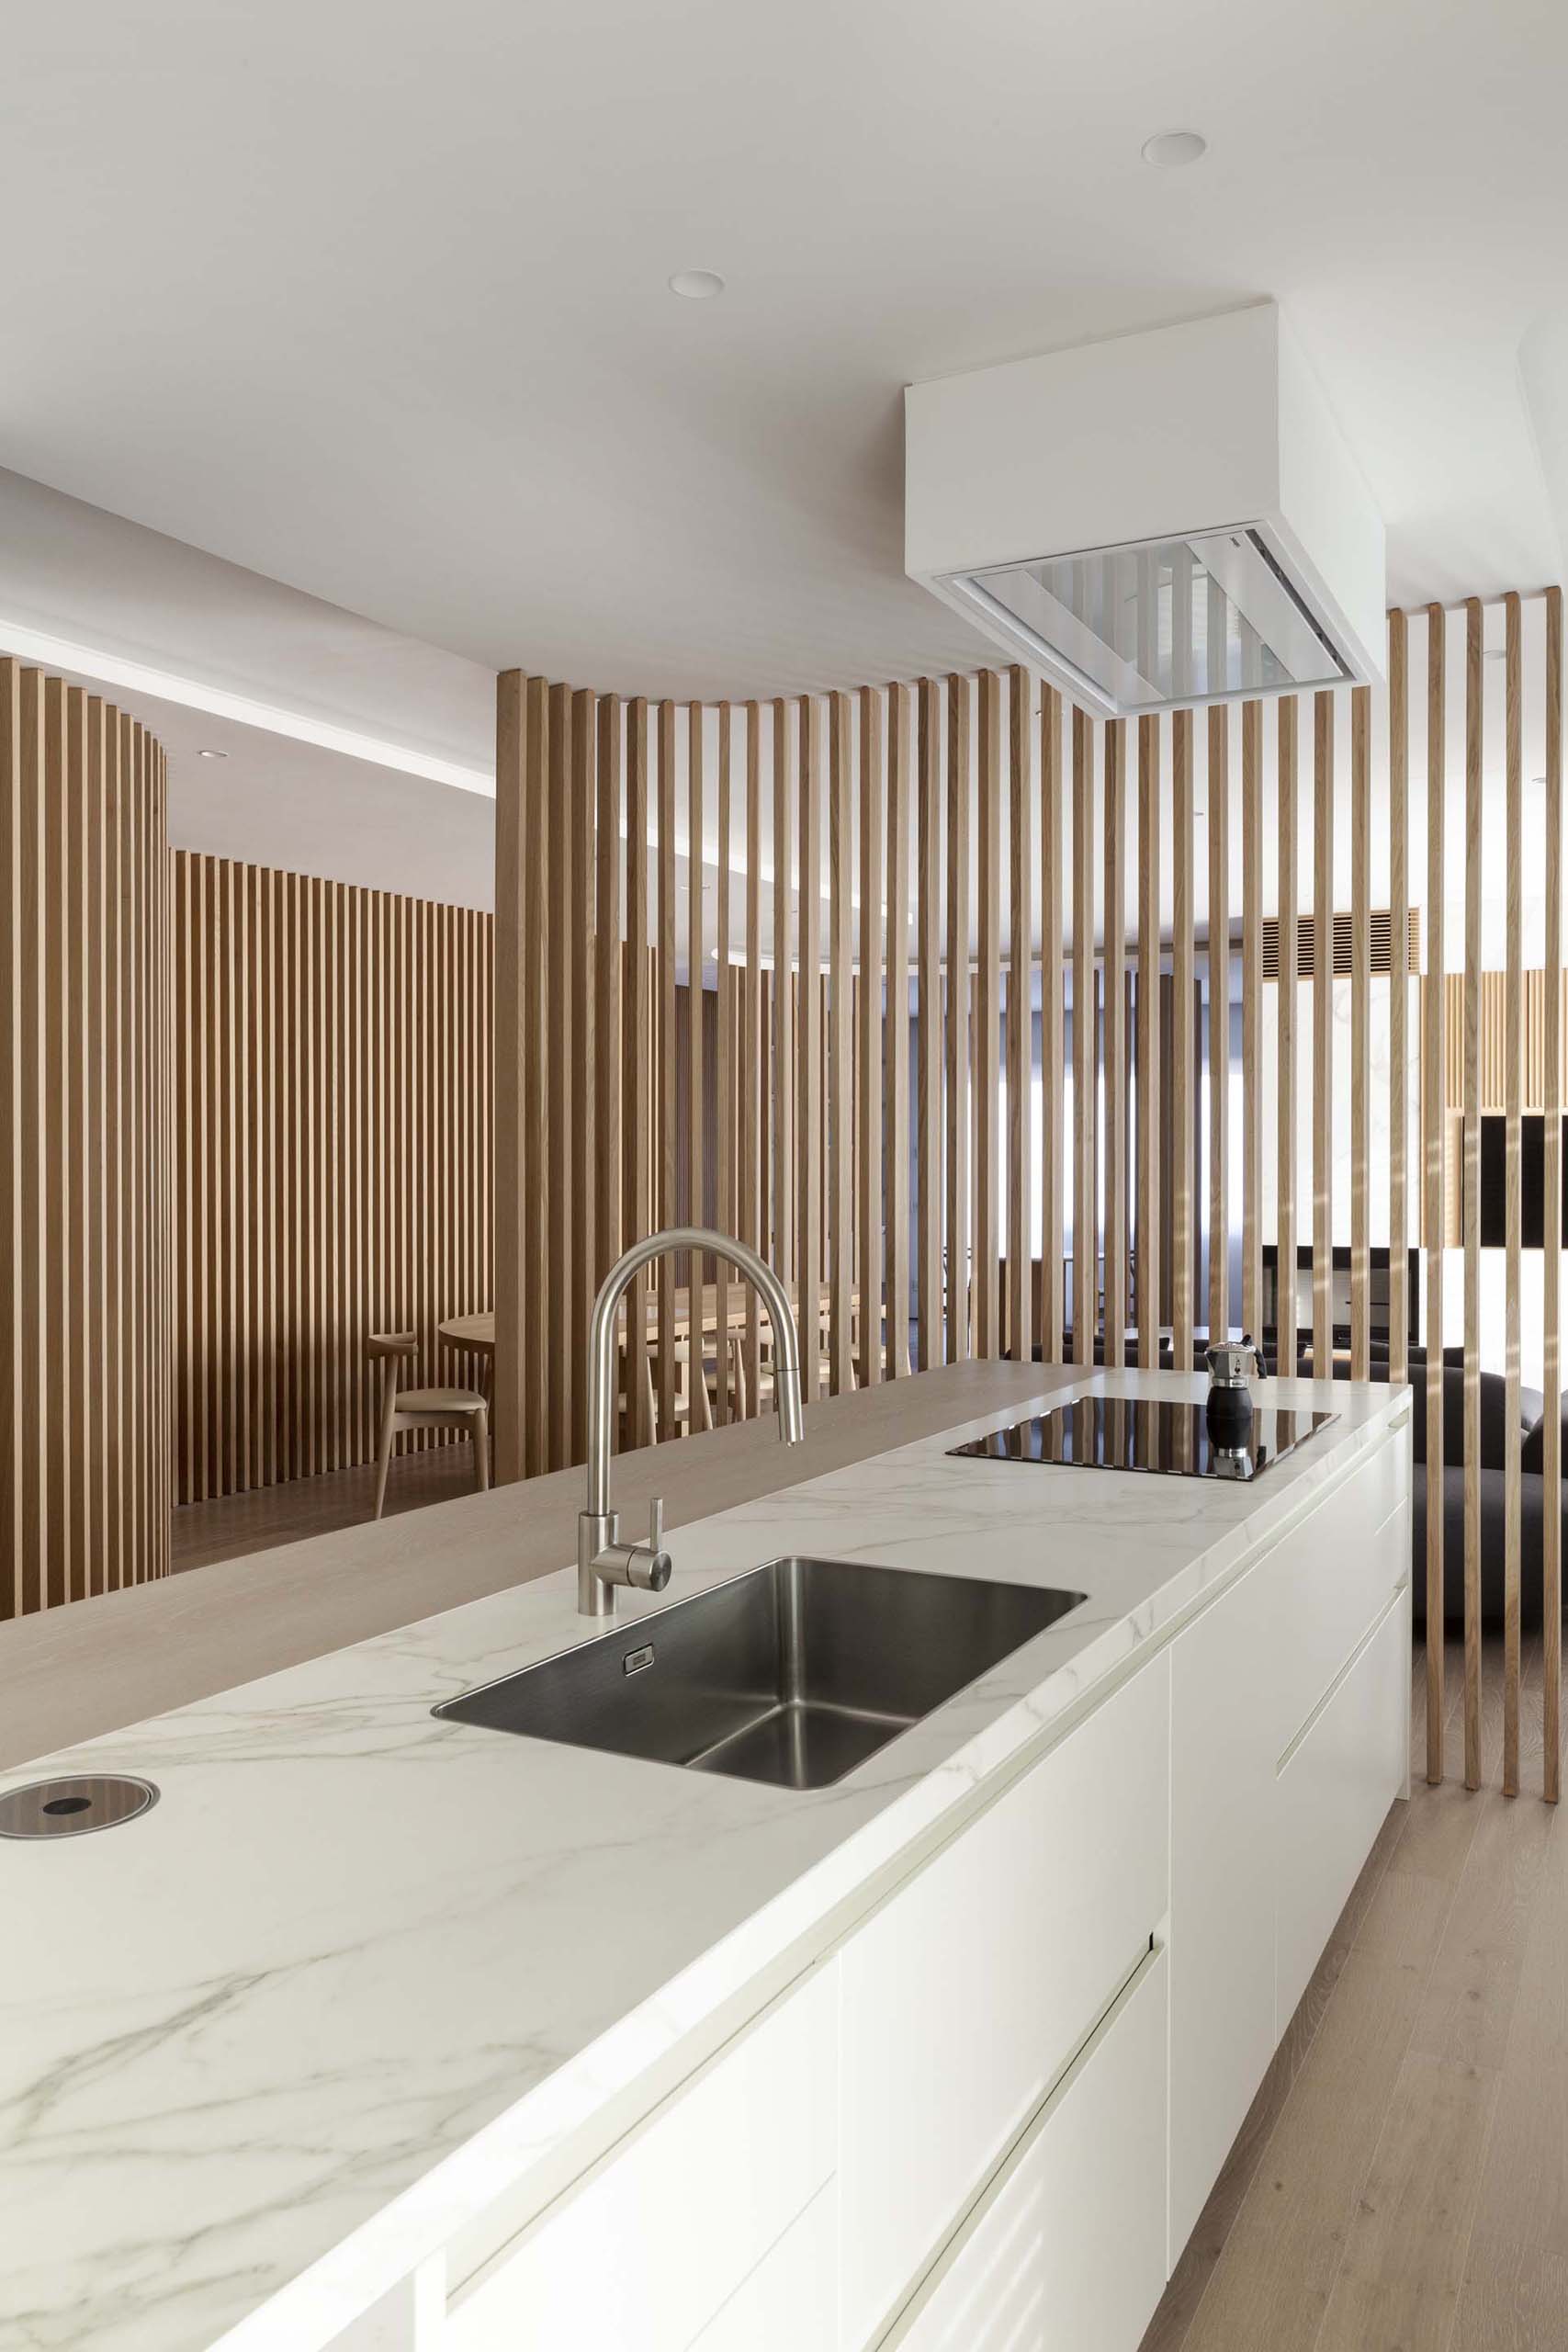 A modern apartment uses oak partitions to separate the various zones of the interior.